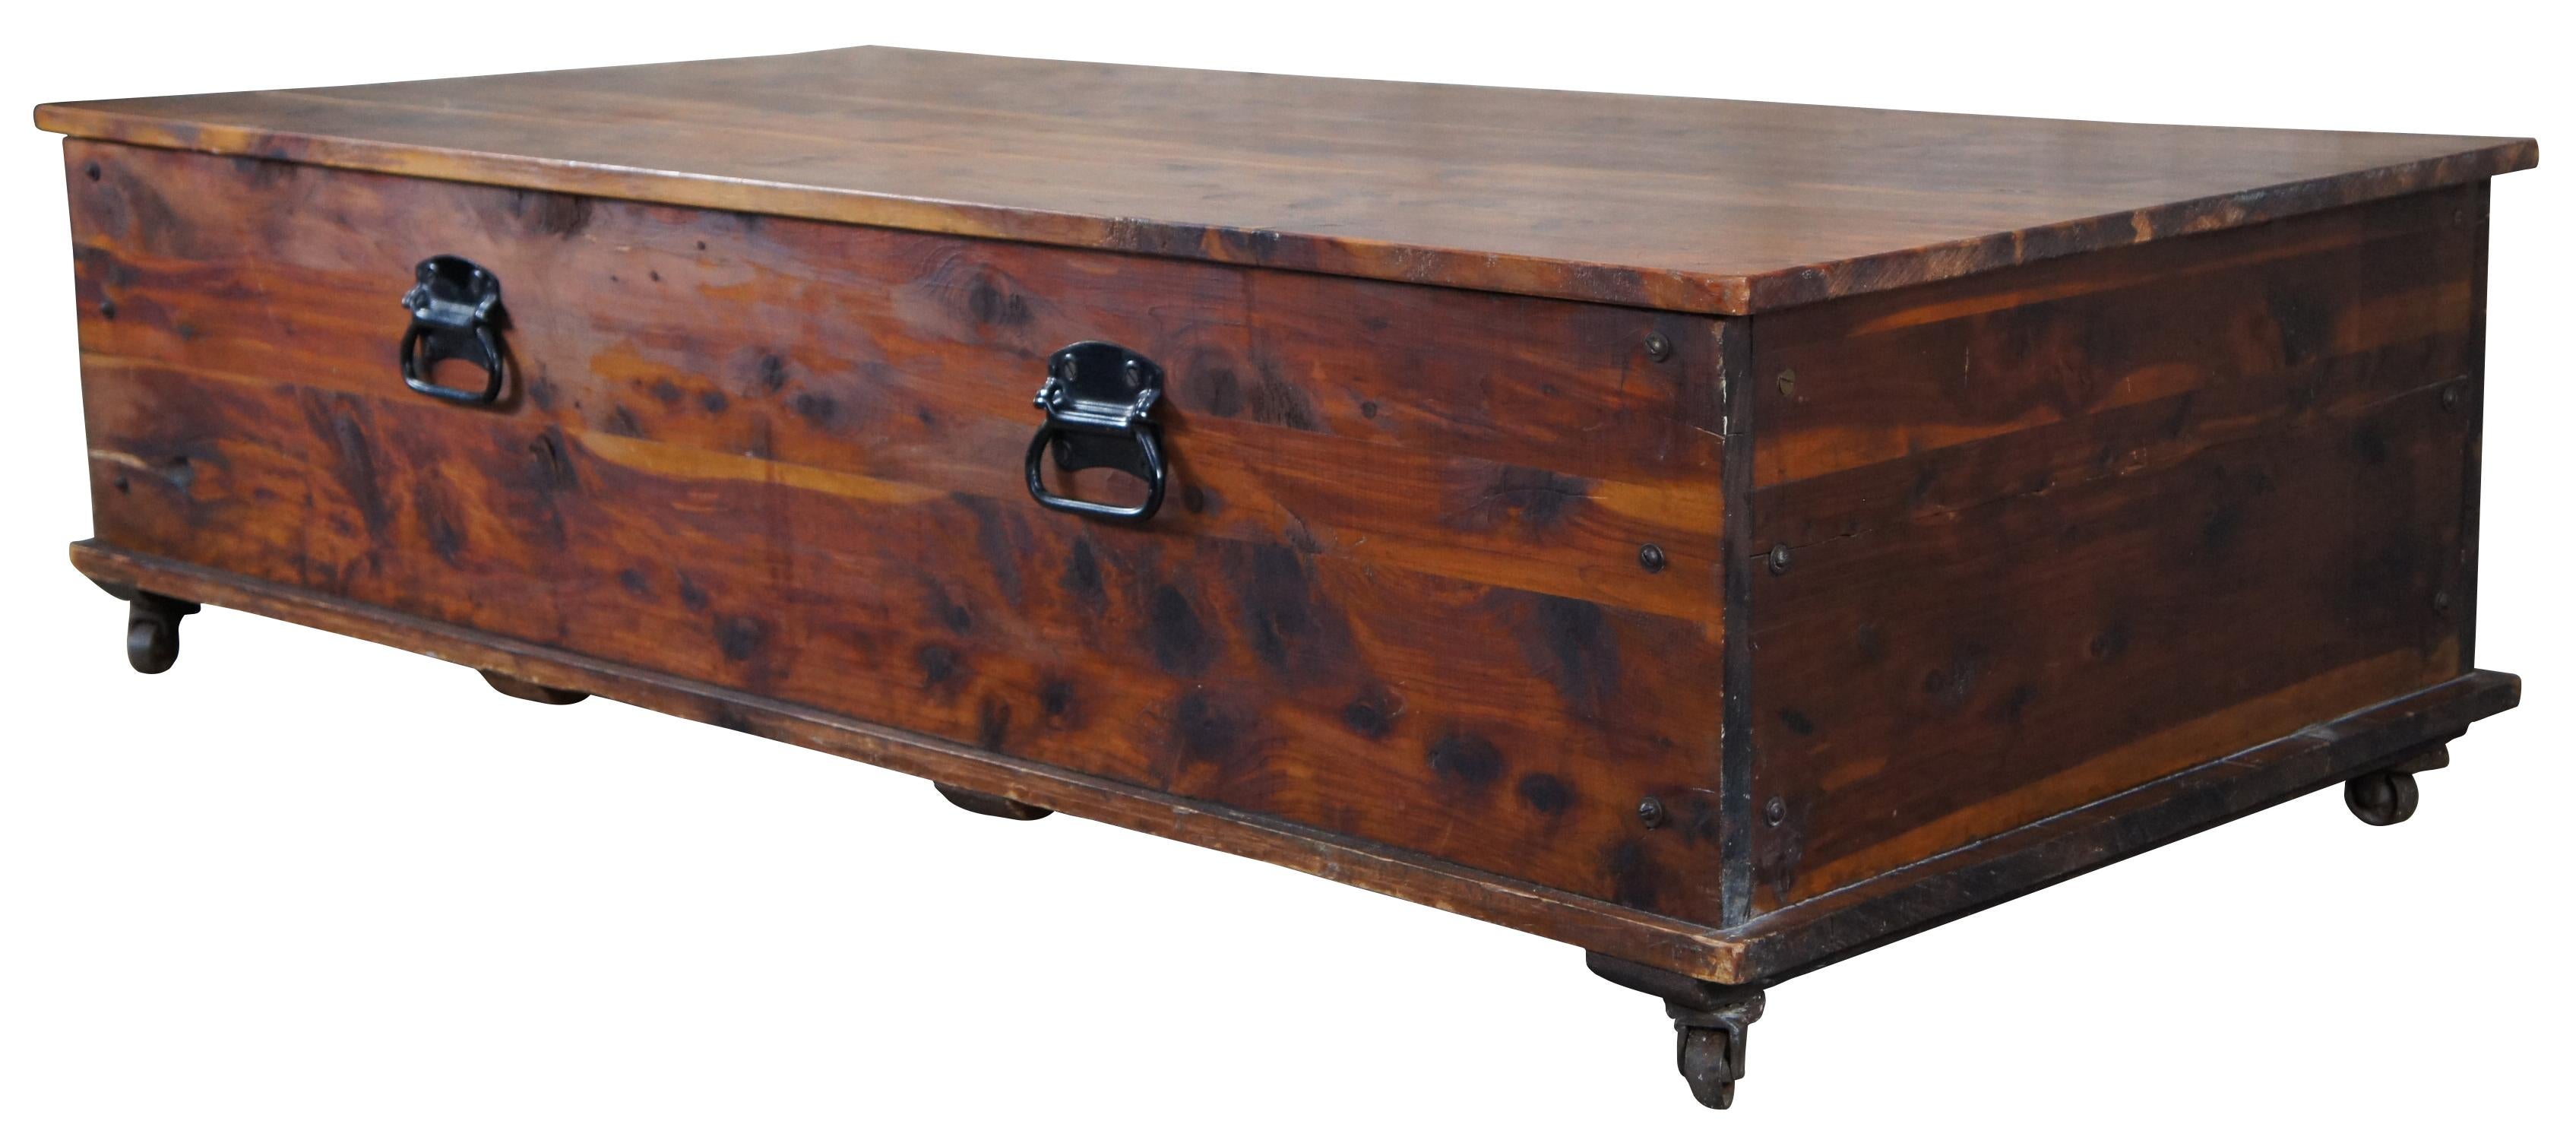 A large beautiful coffee table or storage chest, circa 1940s. Rectangular form with iron hardware and industrial casters.
 